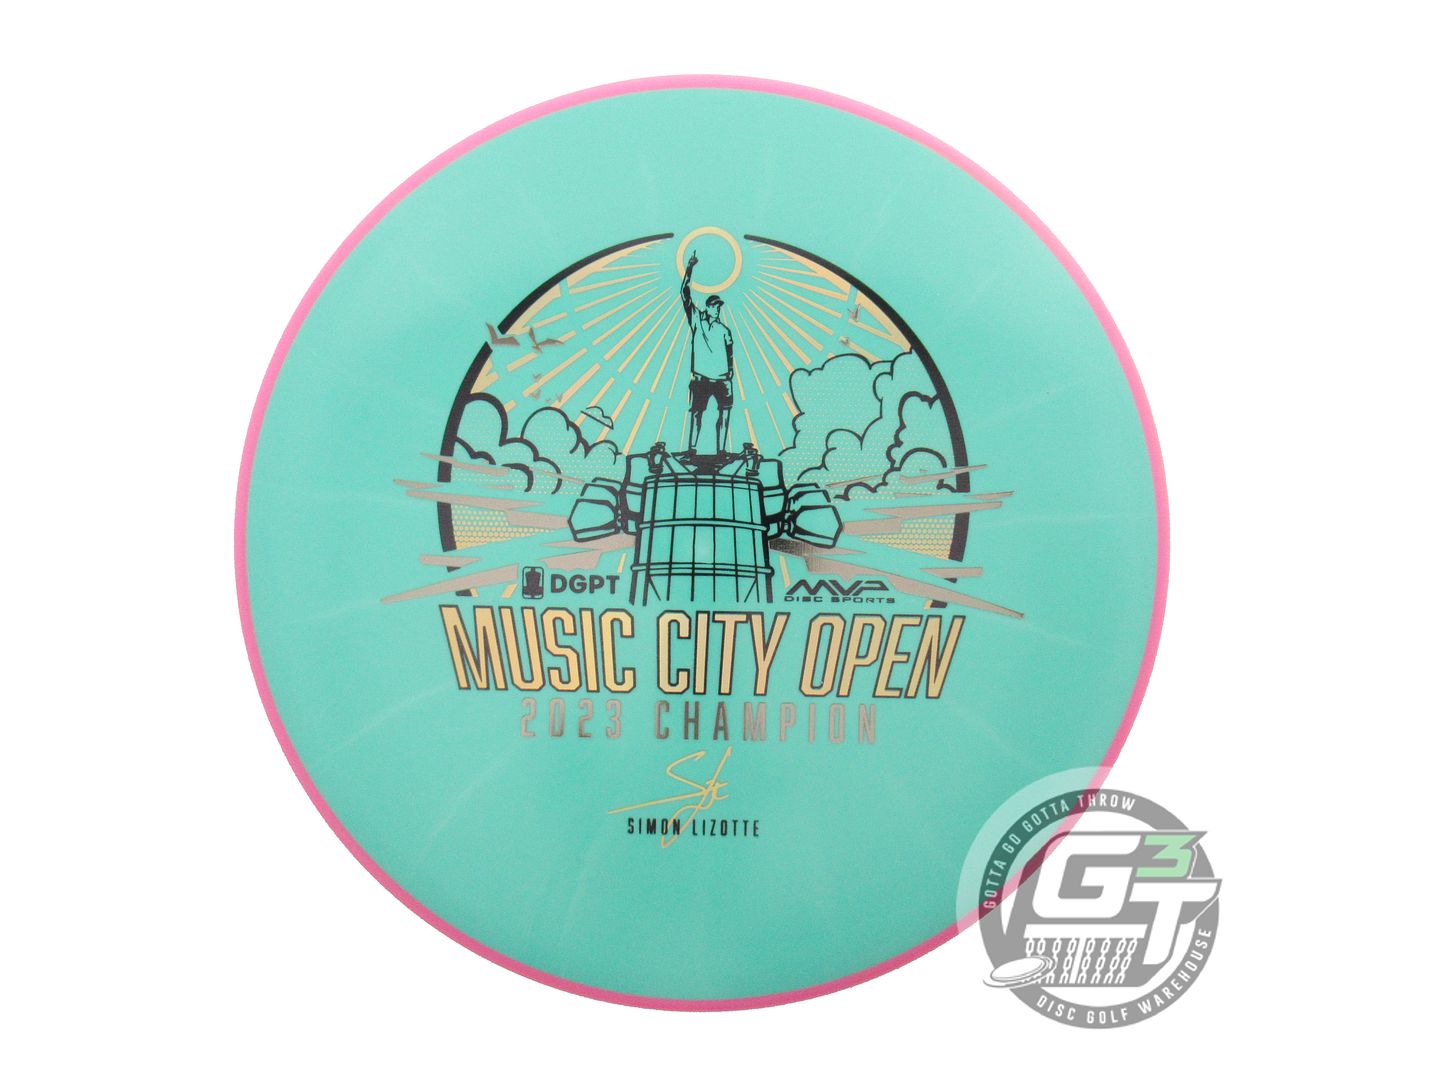 Axiom Limited Edition Simon Lizotte 2023 Music City Open Champion Edition Fission Proxy Putter Golf Disc (Individually Listed)